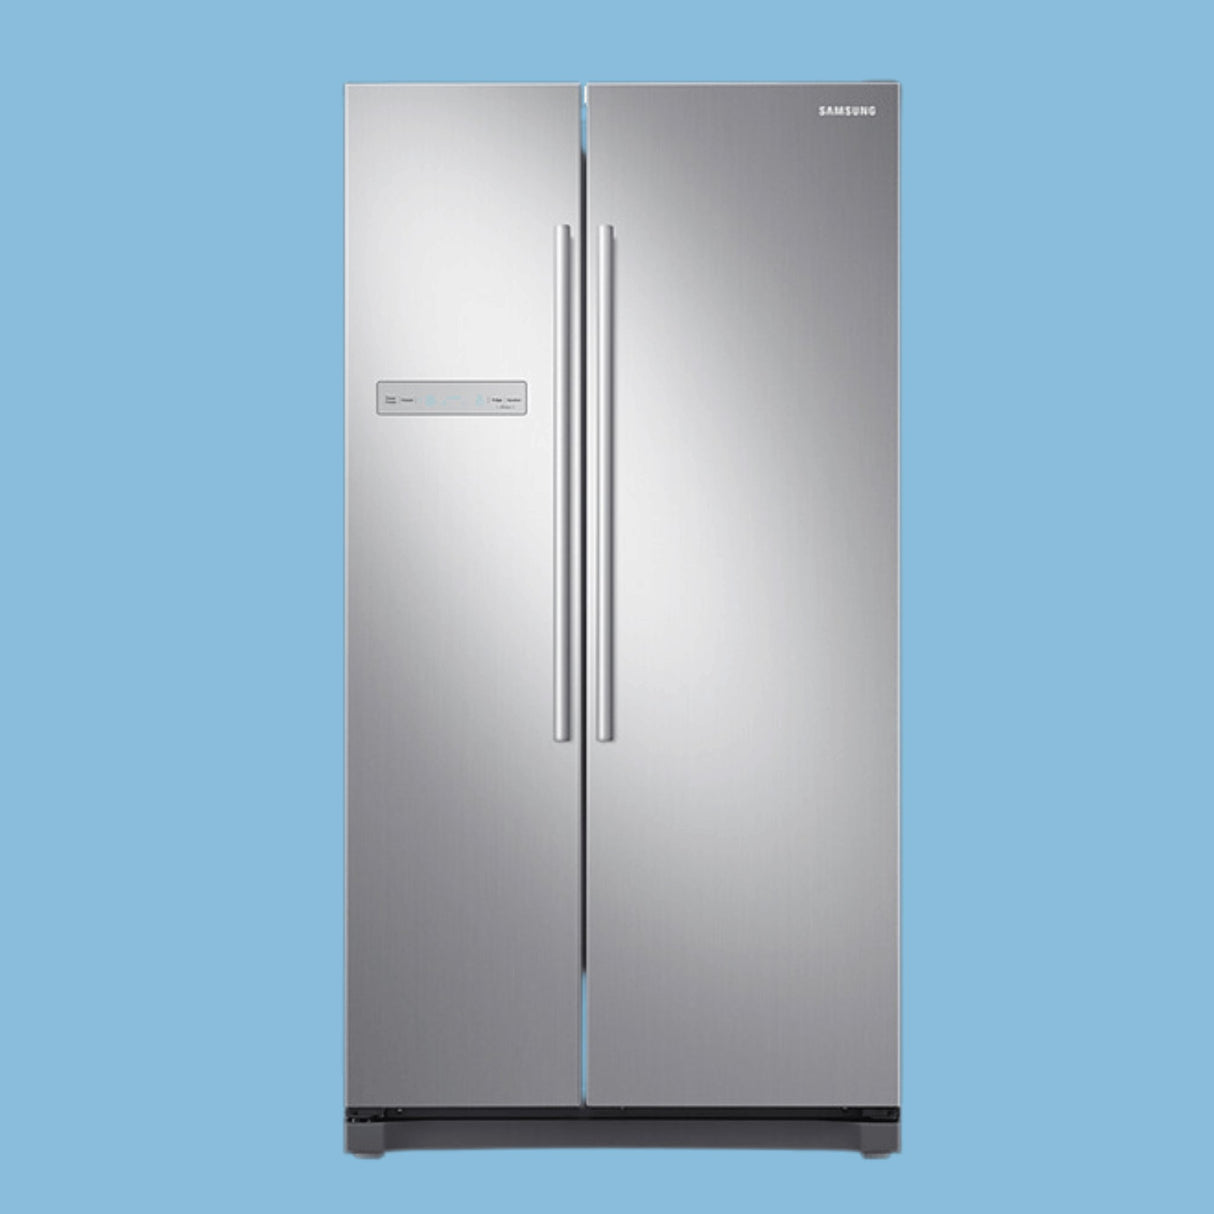 Samsung 540 Ltr Side By Side Refrigerator RS54N3A13S8 - Inox - KWT Tech Mart